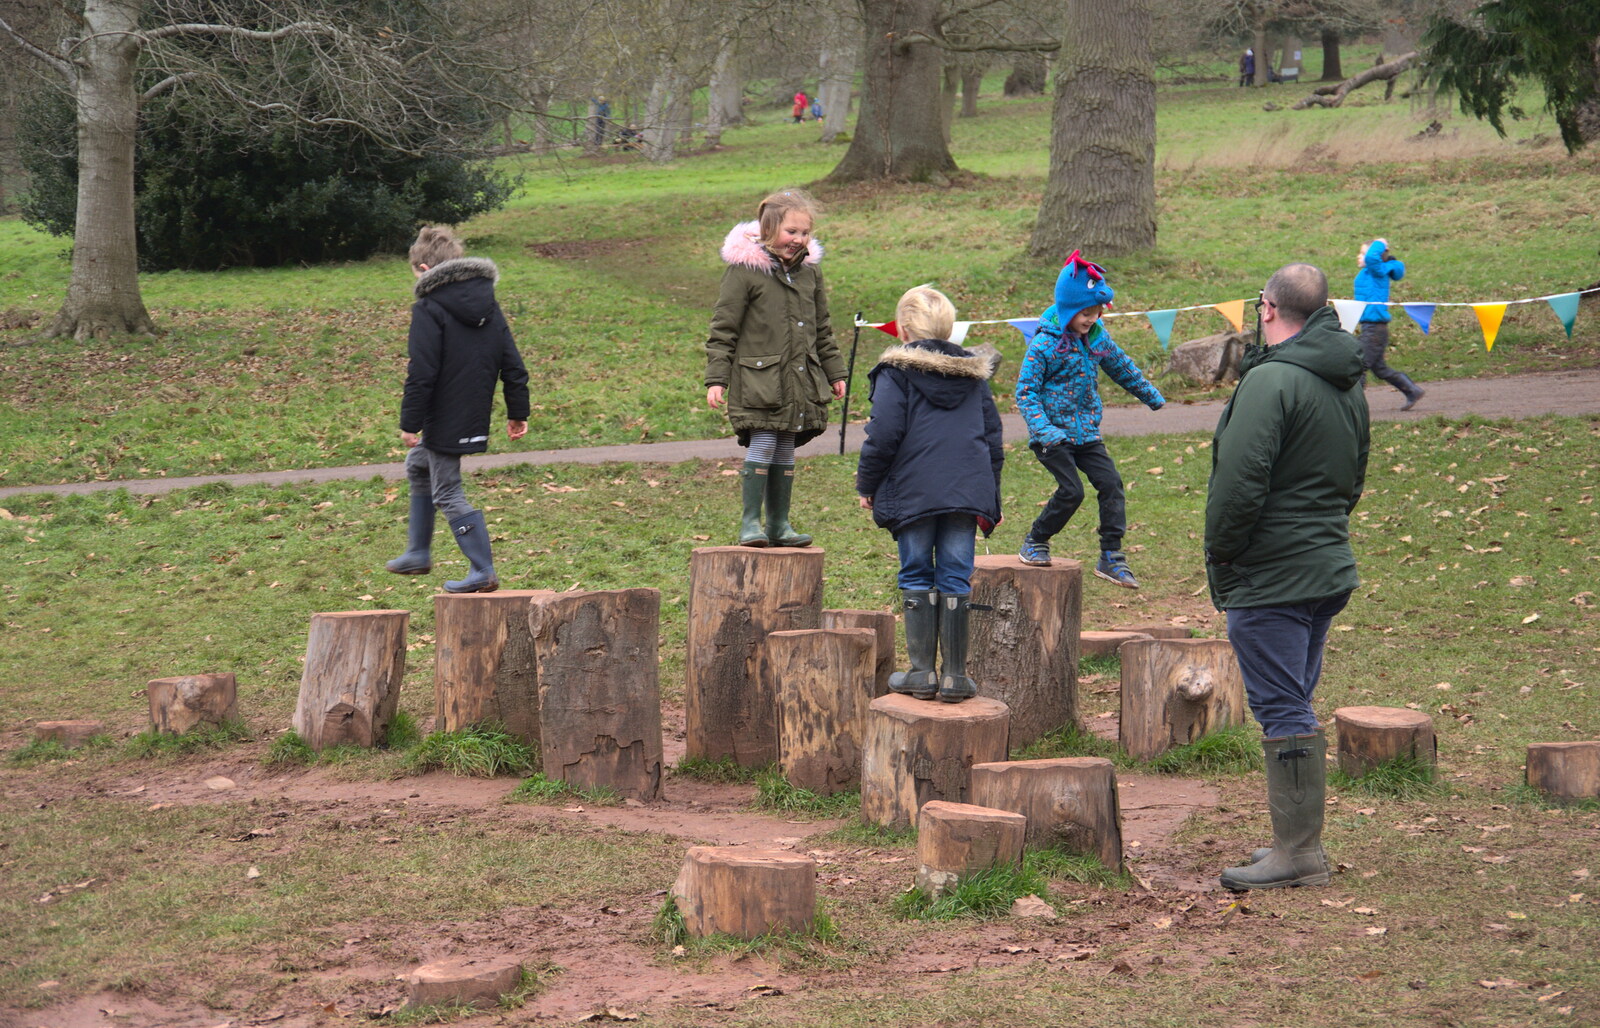 Fred and Harry run around on tree stumps from Killerton House, Broadclyst, Devon - 30th December 2017